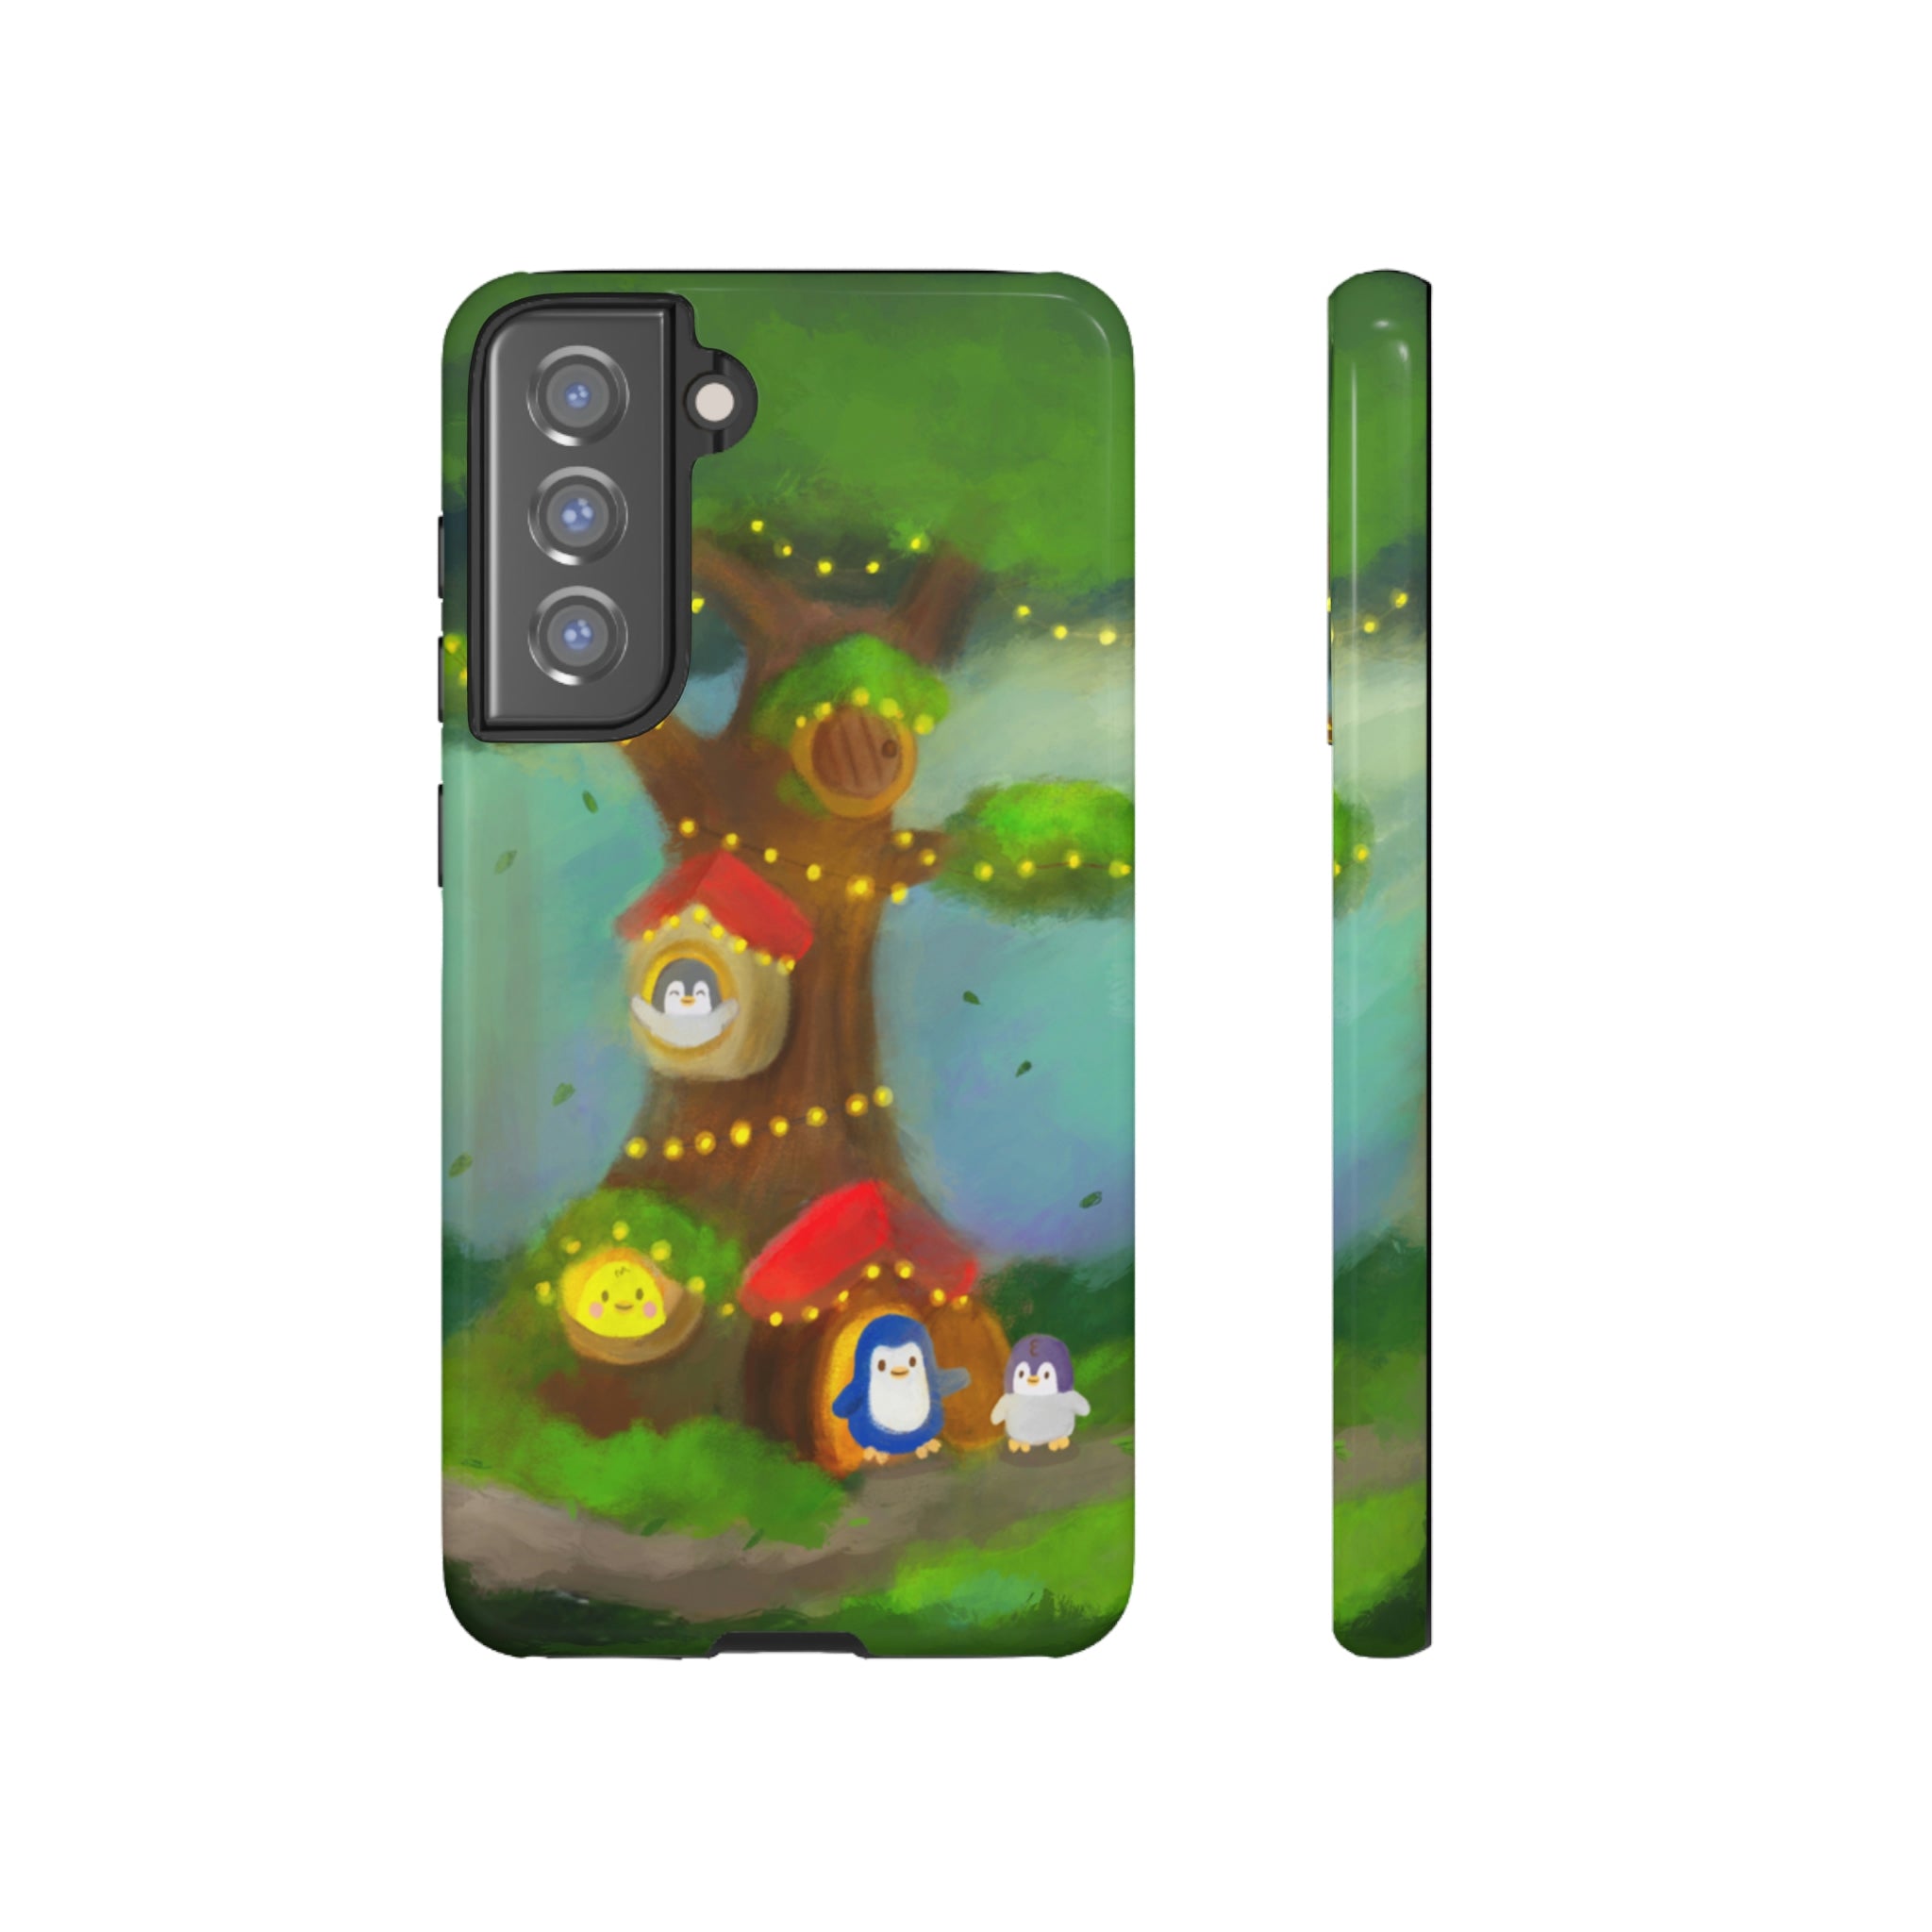 Our Home in the Forest Samsung/Google Phone Case